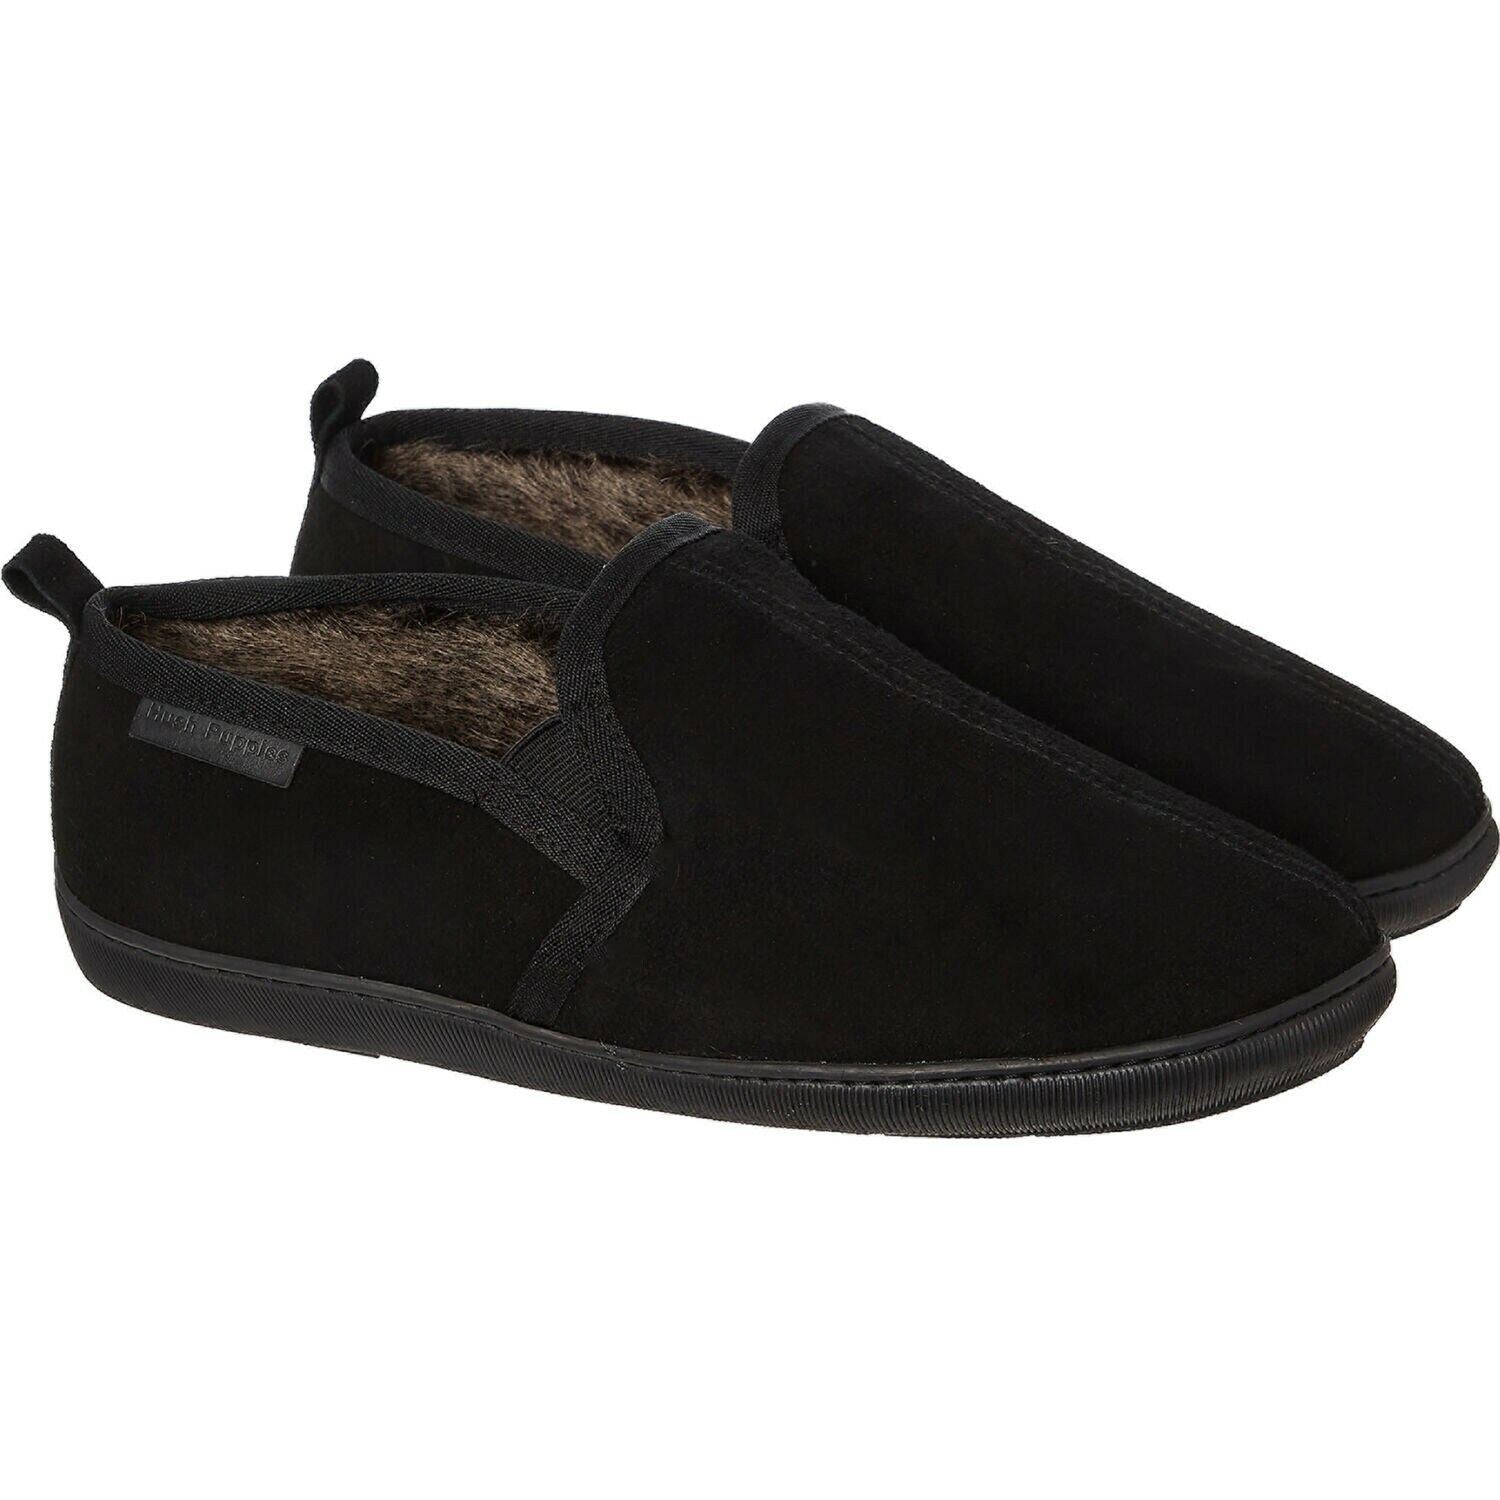 HUSH PUPPPIES - ARNOLD Men's Genuine Suede Slippers, Black, size UK 11